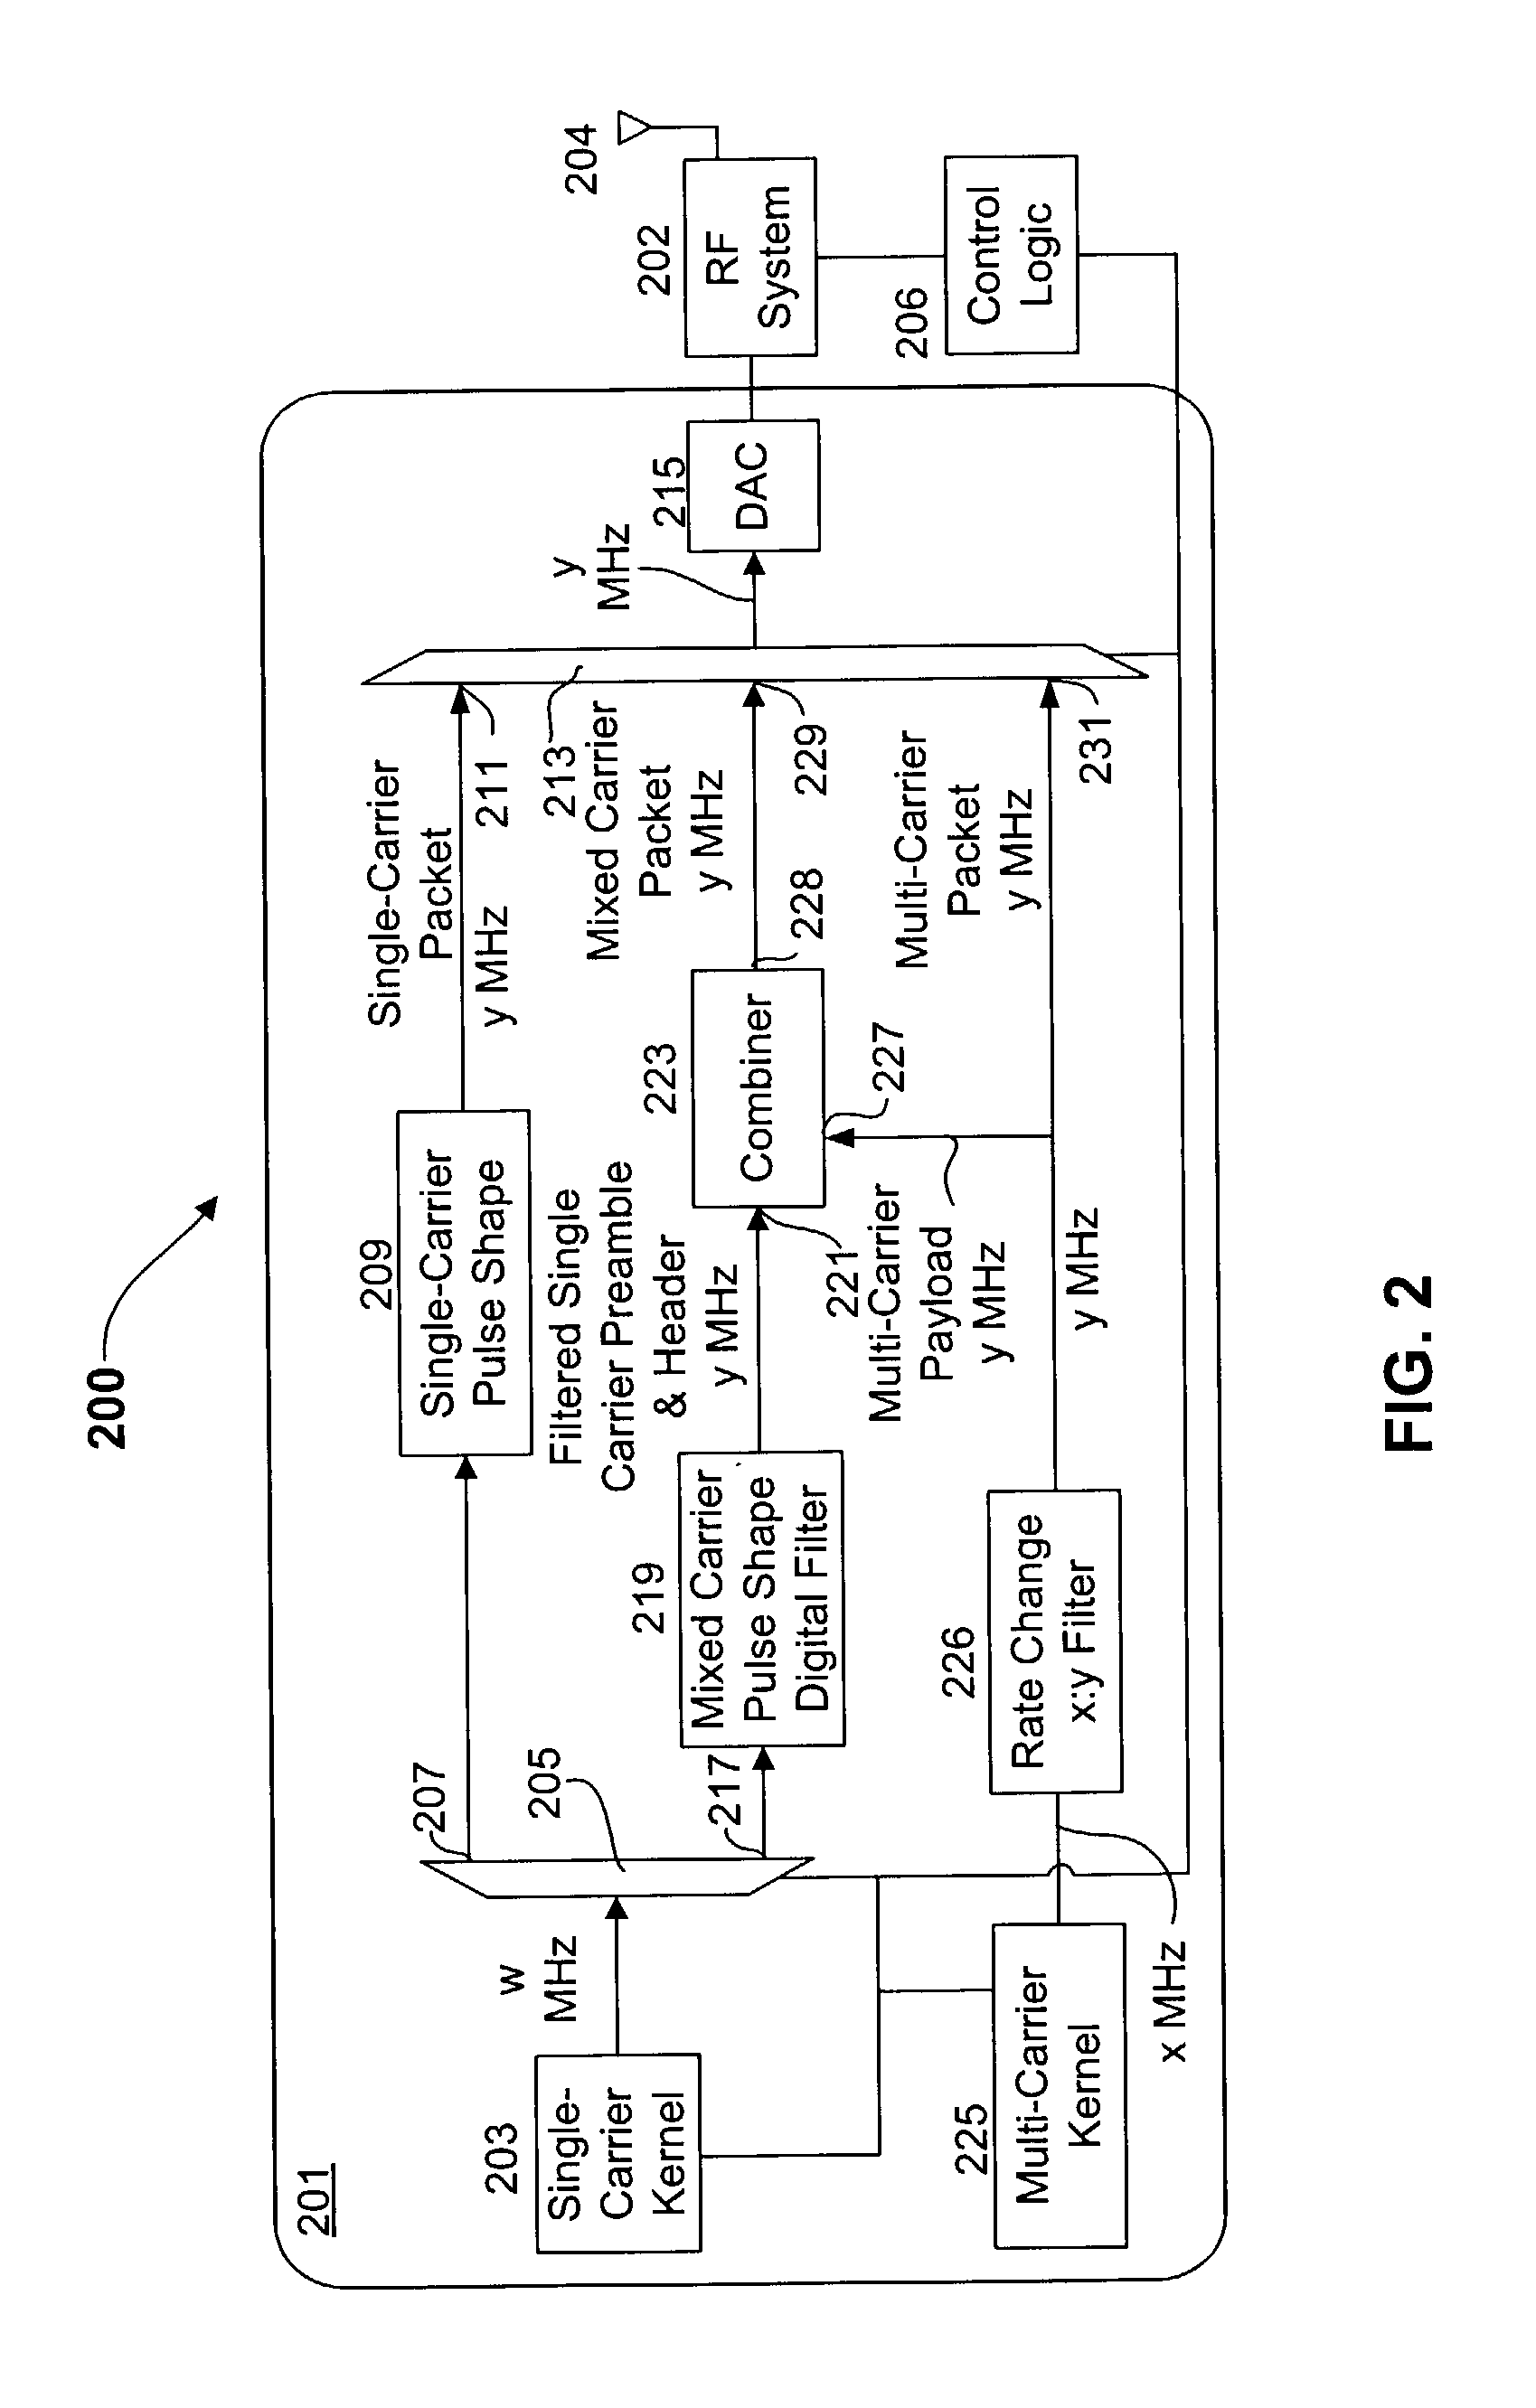 Sample rate change between single-carrier and multi-carrier waveforms